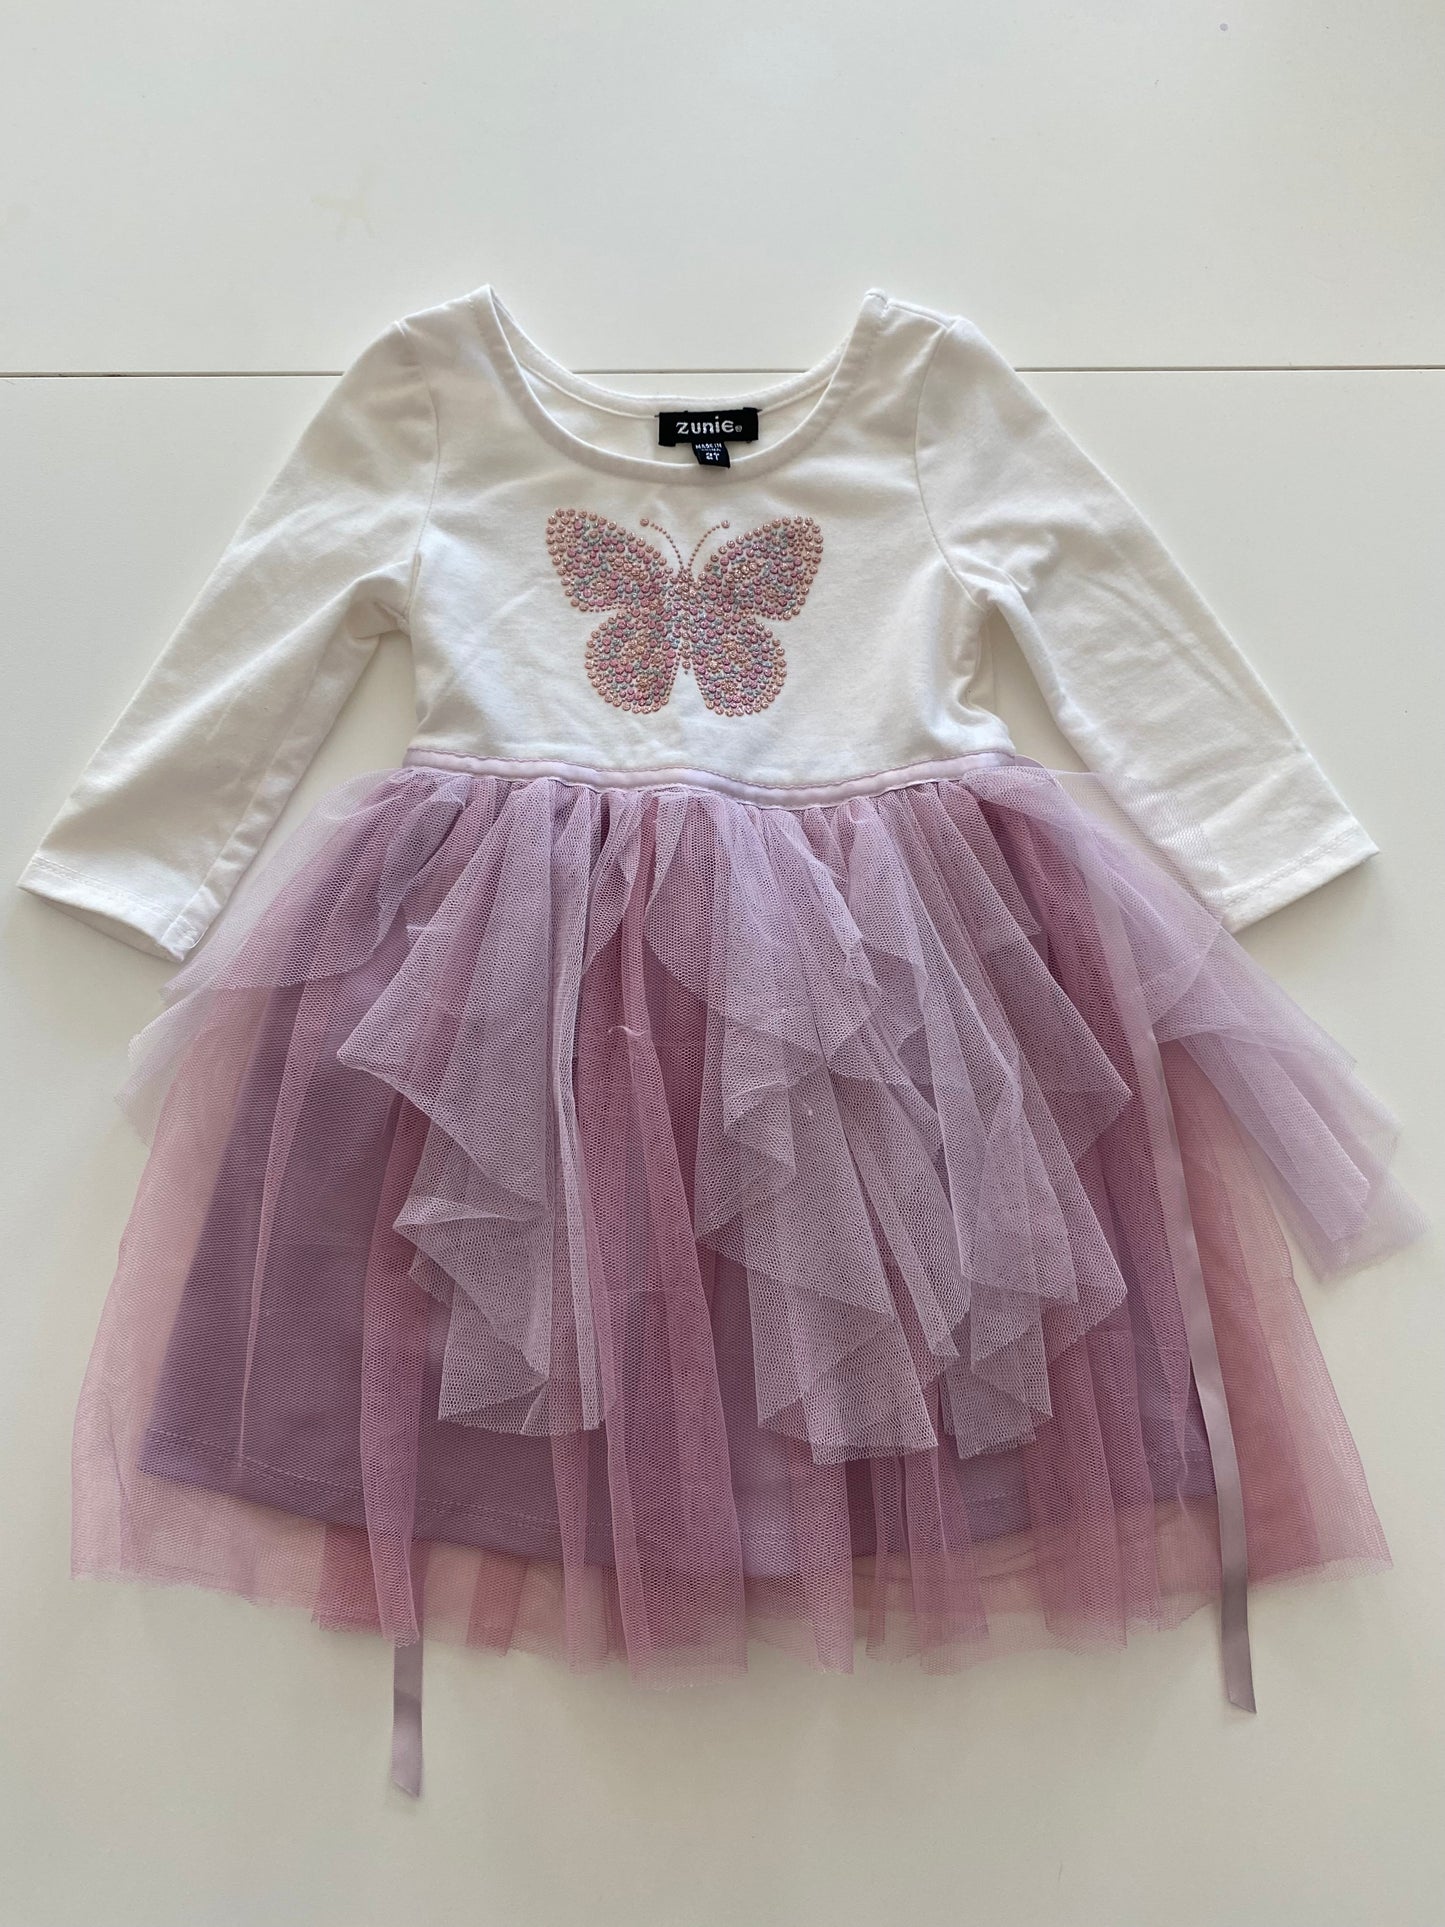 Zunie Butterfly Dress with purple tulle girls 2T